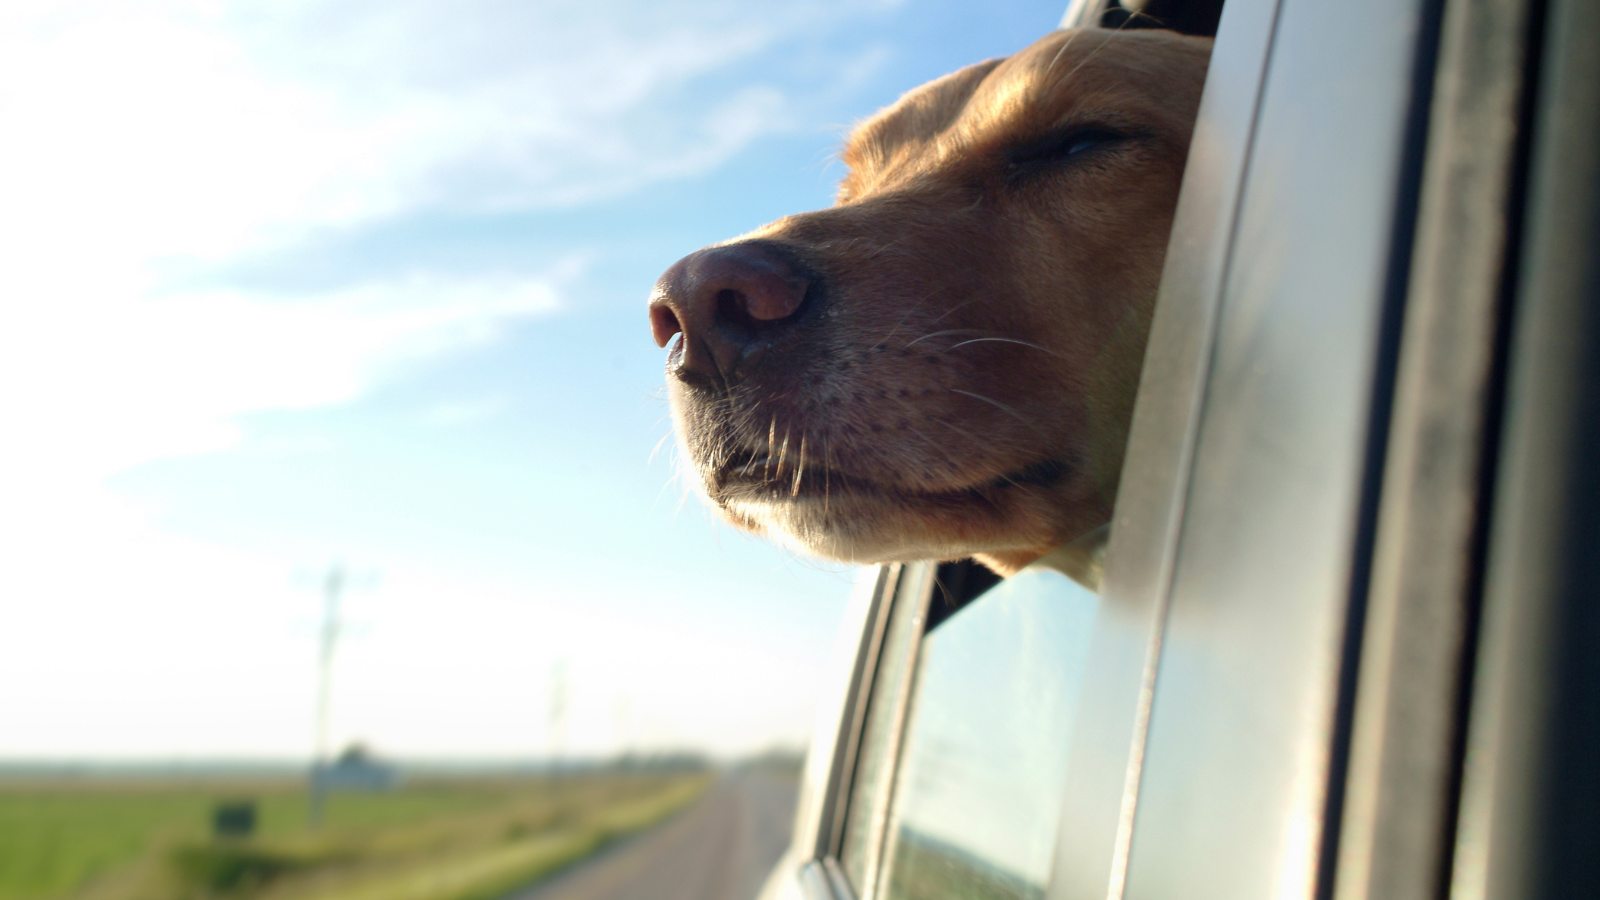 Dog with its head out the window